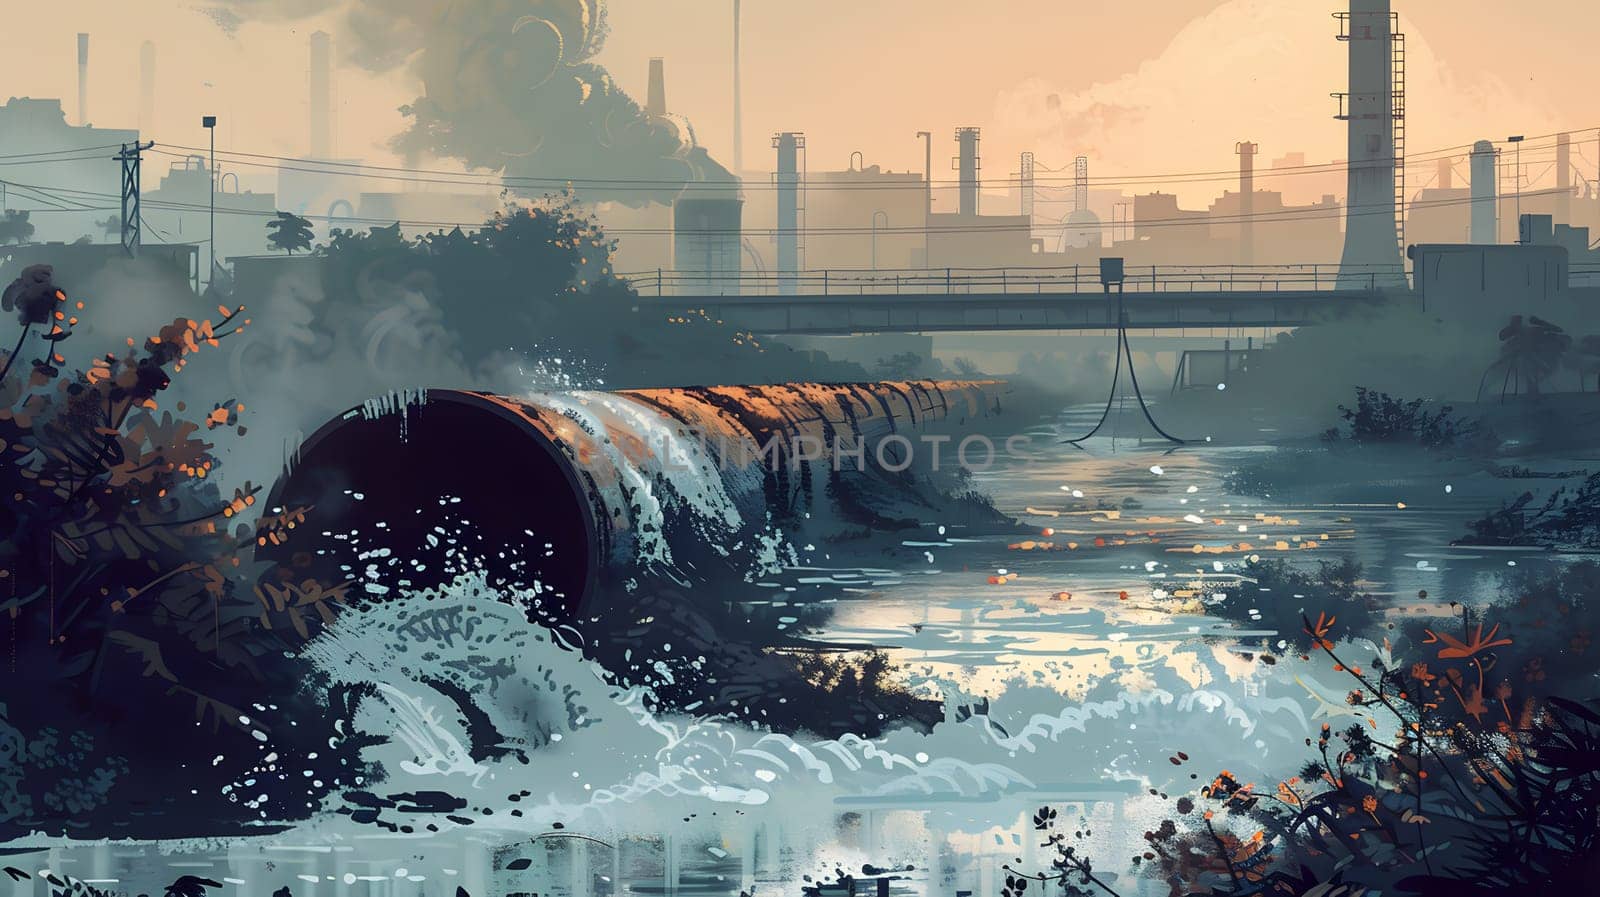 A painting of a river flowing through a pipe with a factory in the background by Nadtochiy